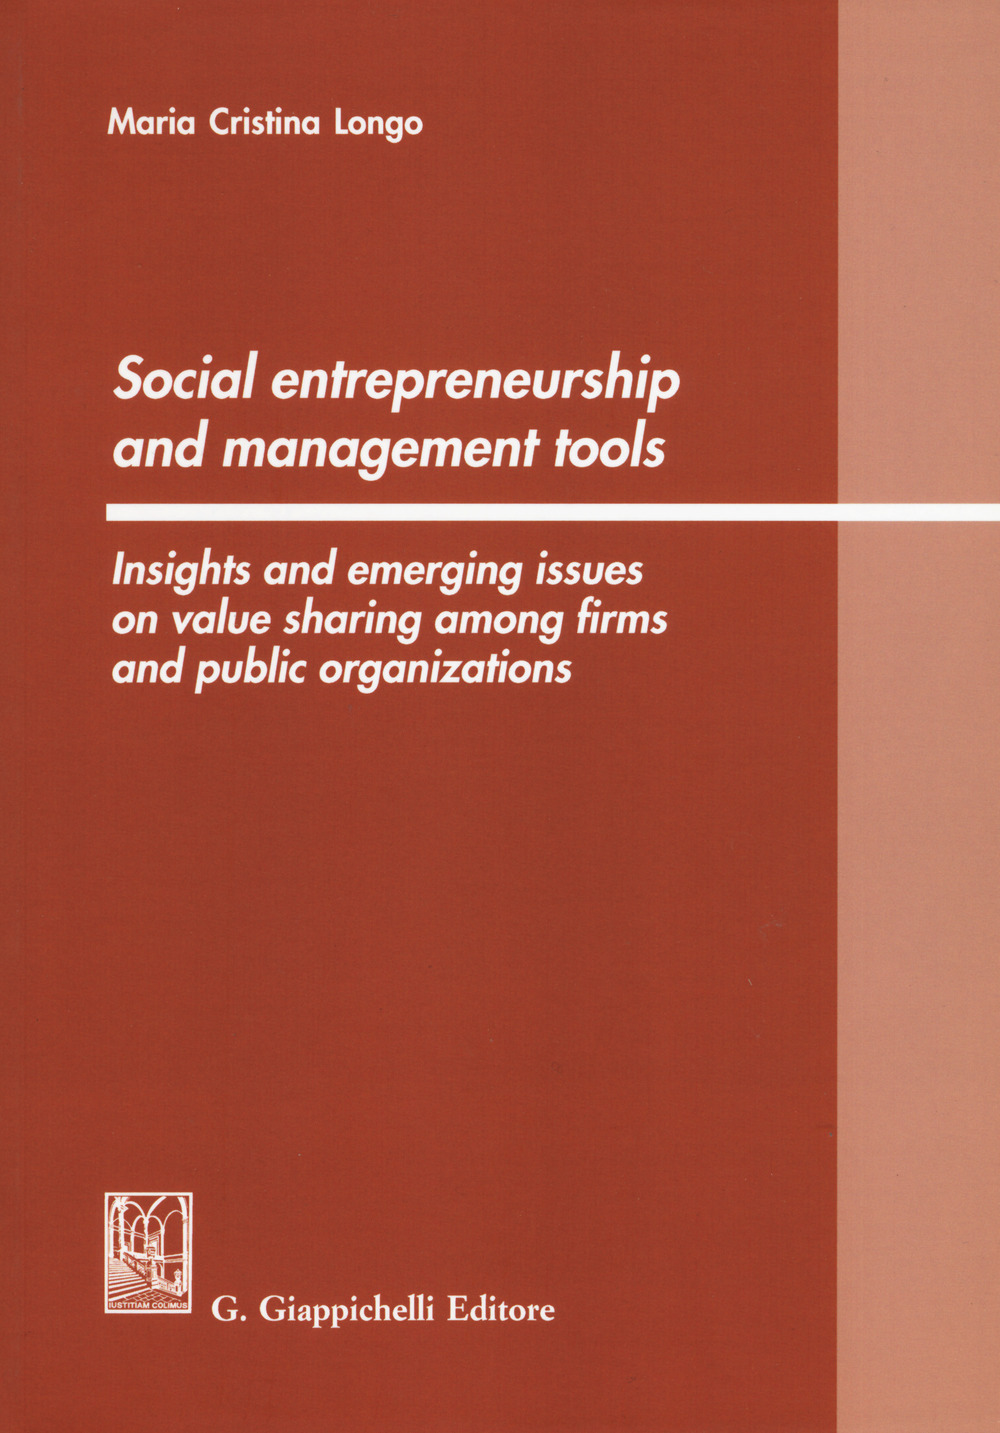 Social entrepreneurship and management tools. Insights and emerging issues on value sharing among firms and public organizations